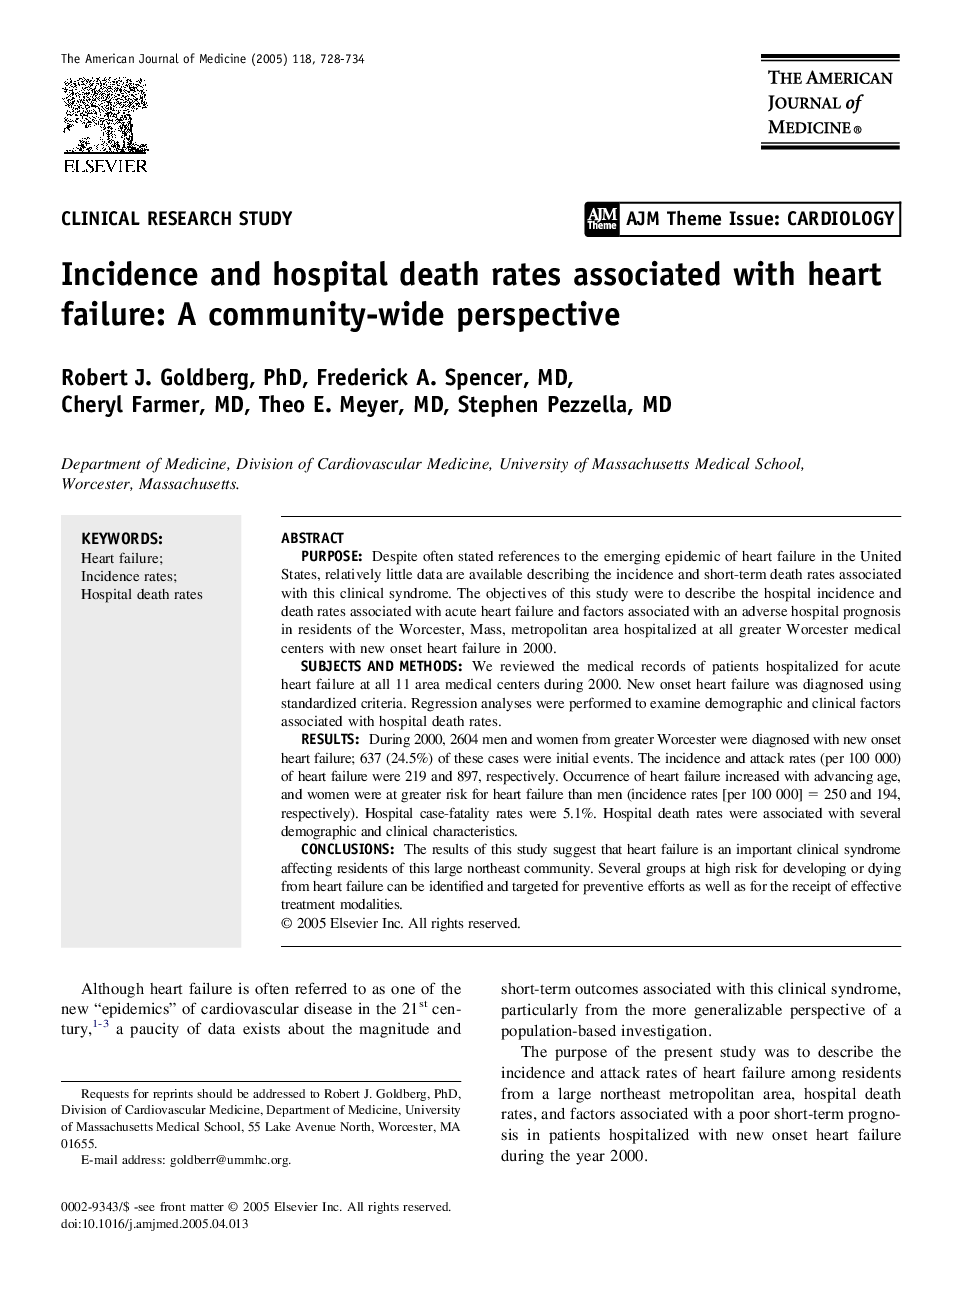 Incidence and hospital death rates associated with heart failure: A community-wide perspective